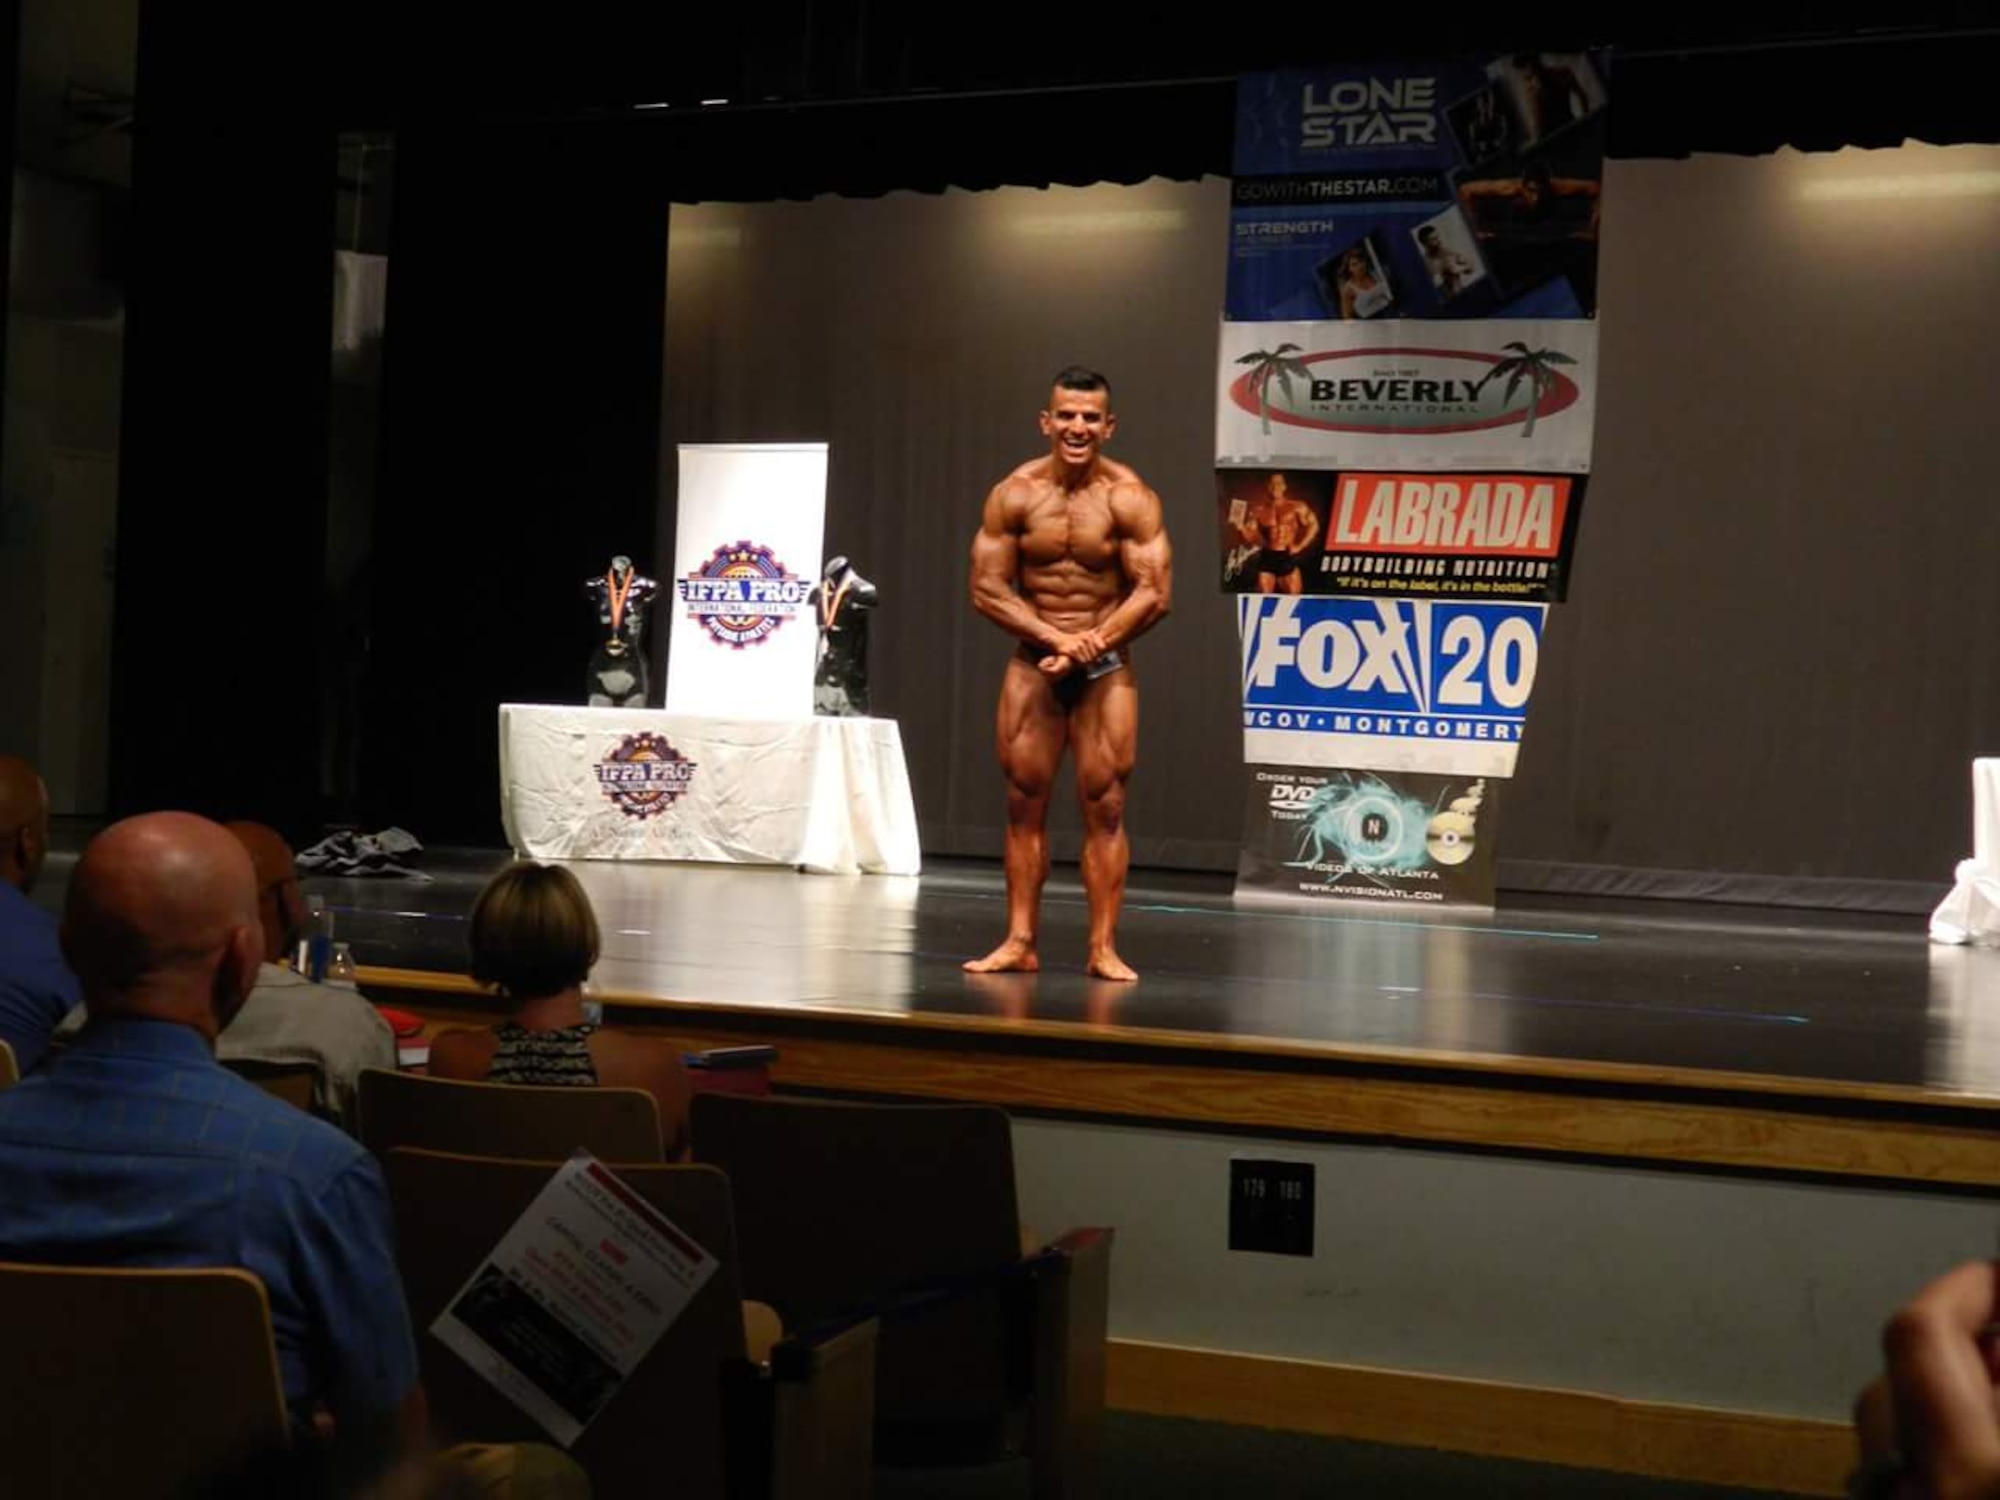 Tech. Sgt. Luis Lopez poses during the International Figure and Physique Association Pro Galaxy Elite Bodybuilding championship at the 19th annual community health fair presented by Baptist Health Rayflex Community Health and Wellness Foundation and 2A Fitness Gym, May 30, 2015, at Carver High School in Montgomery, Alabama. Lopez won Mr. Alabama and qualified to be a professional bodybuilder. (Courtesy photo)